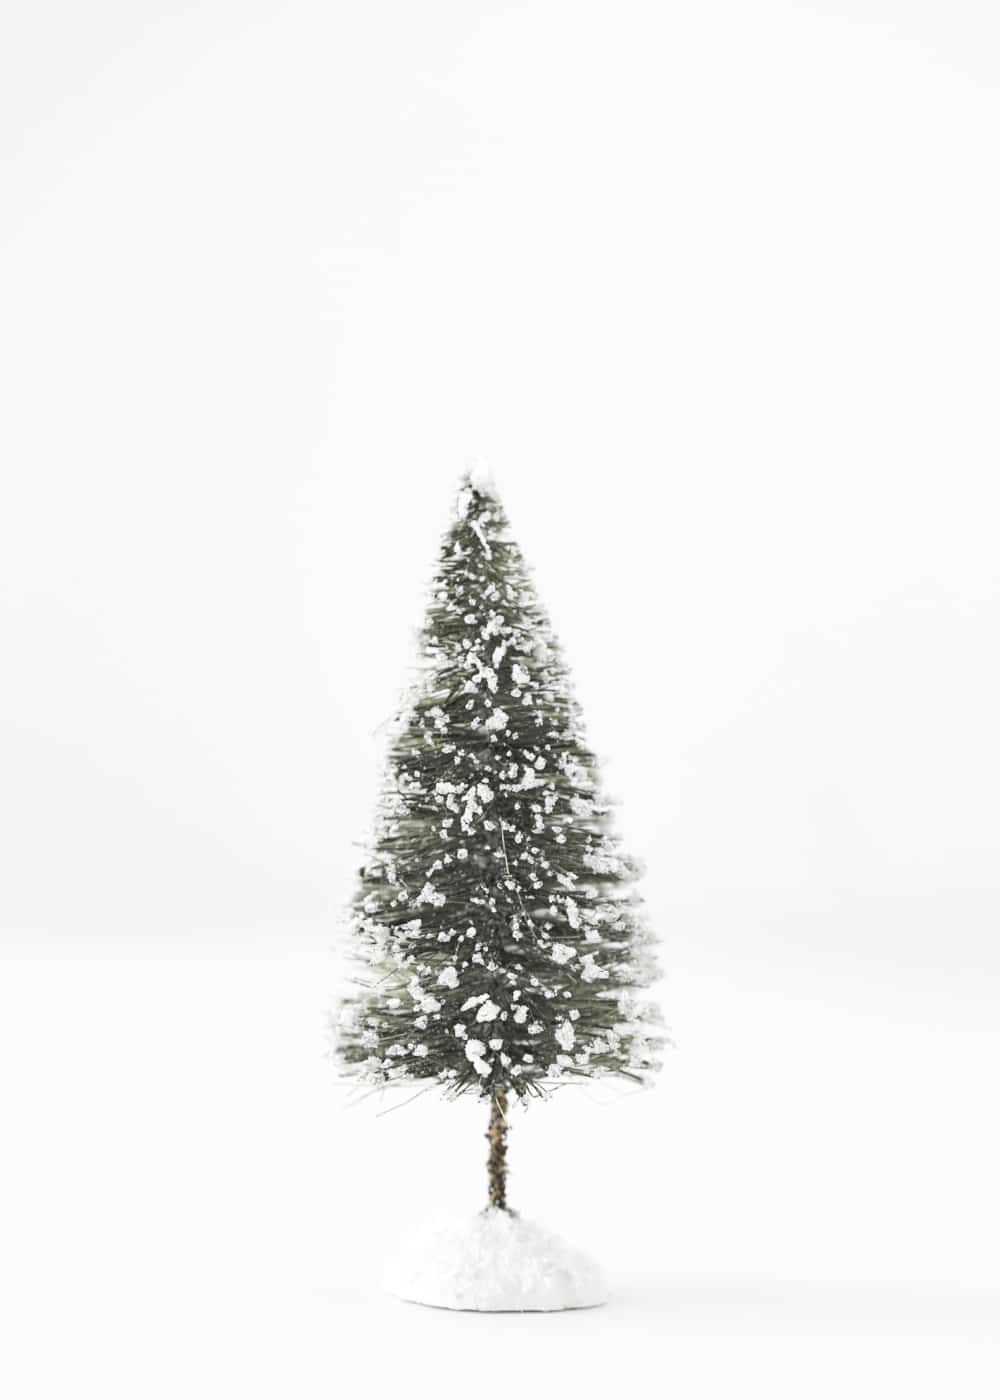 10 Most Eco-Friendly Christmas Trees and Decorations